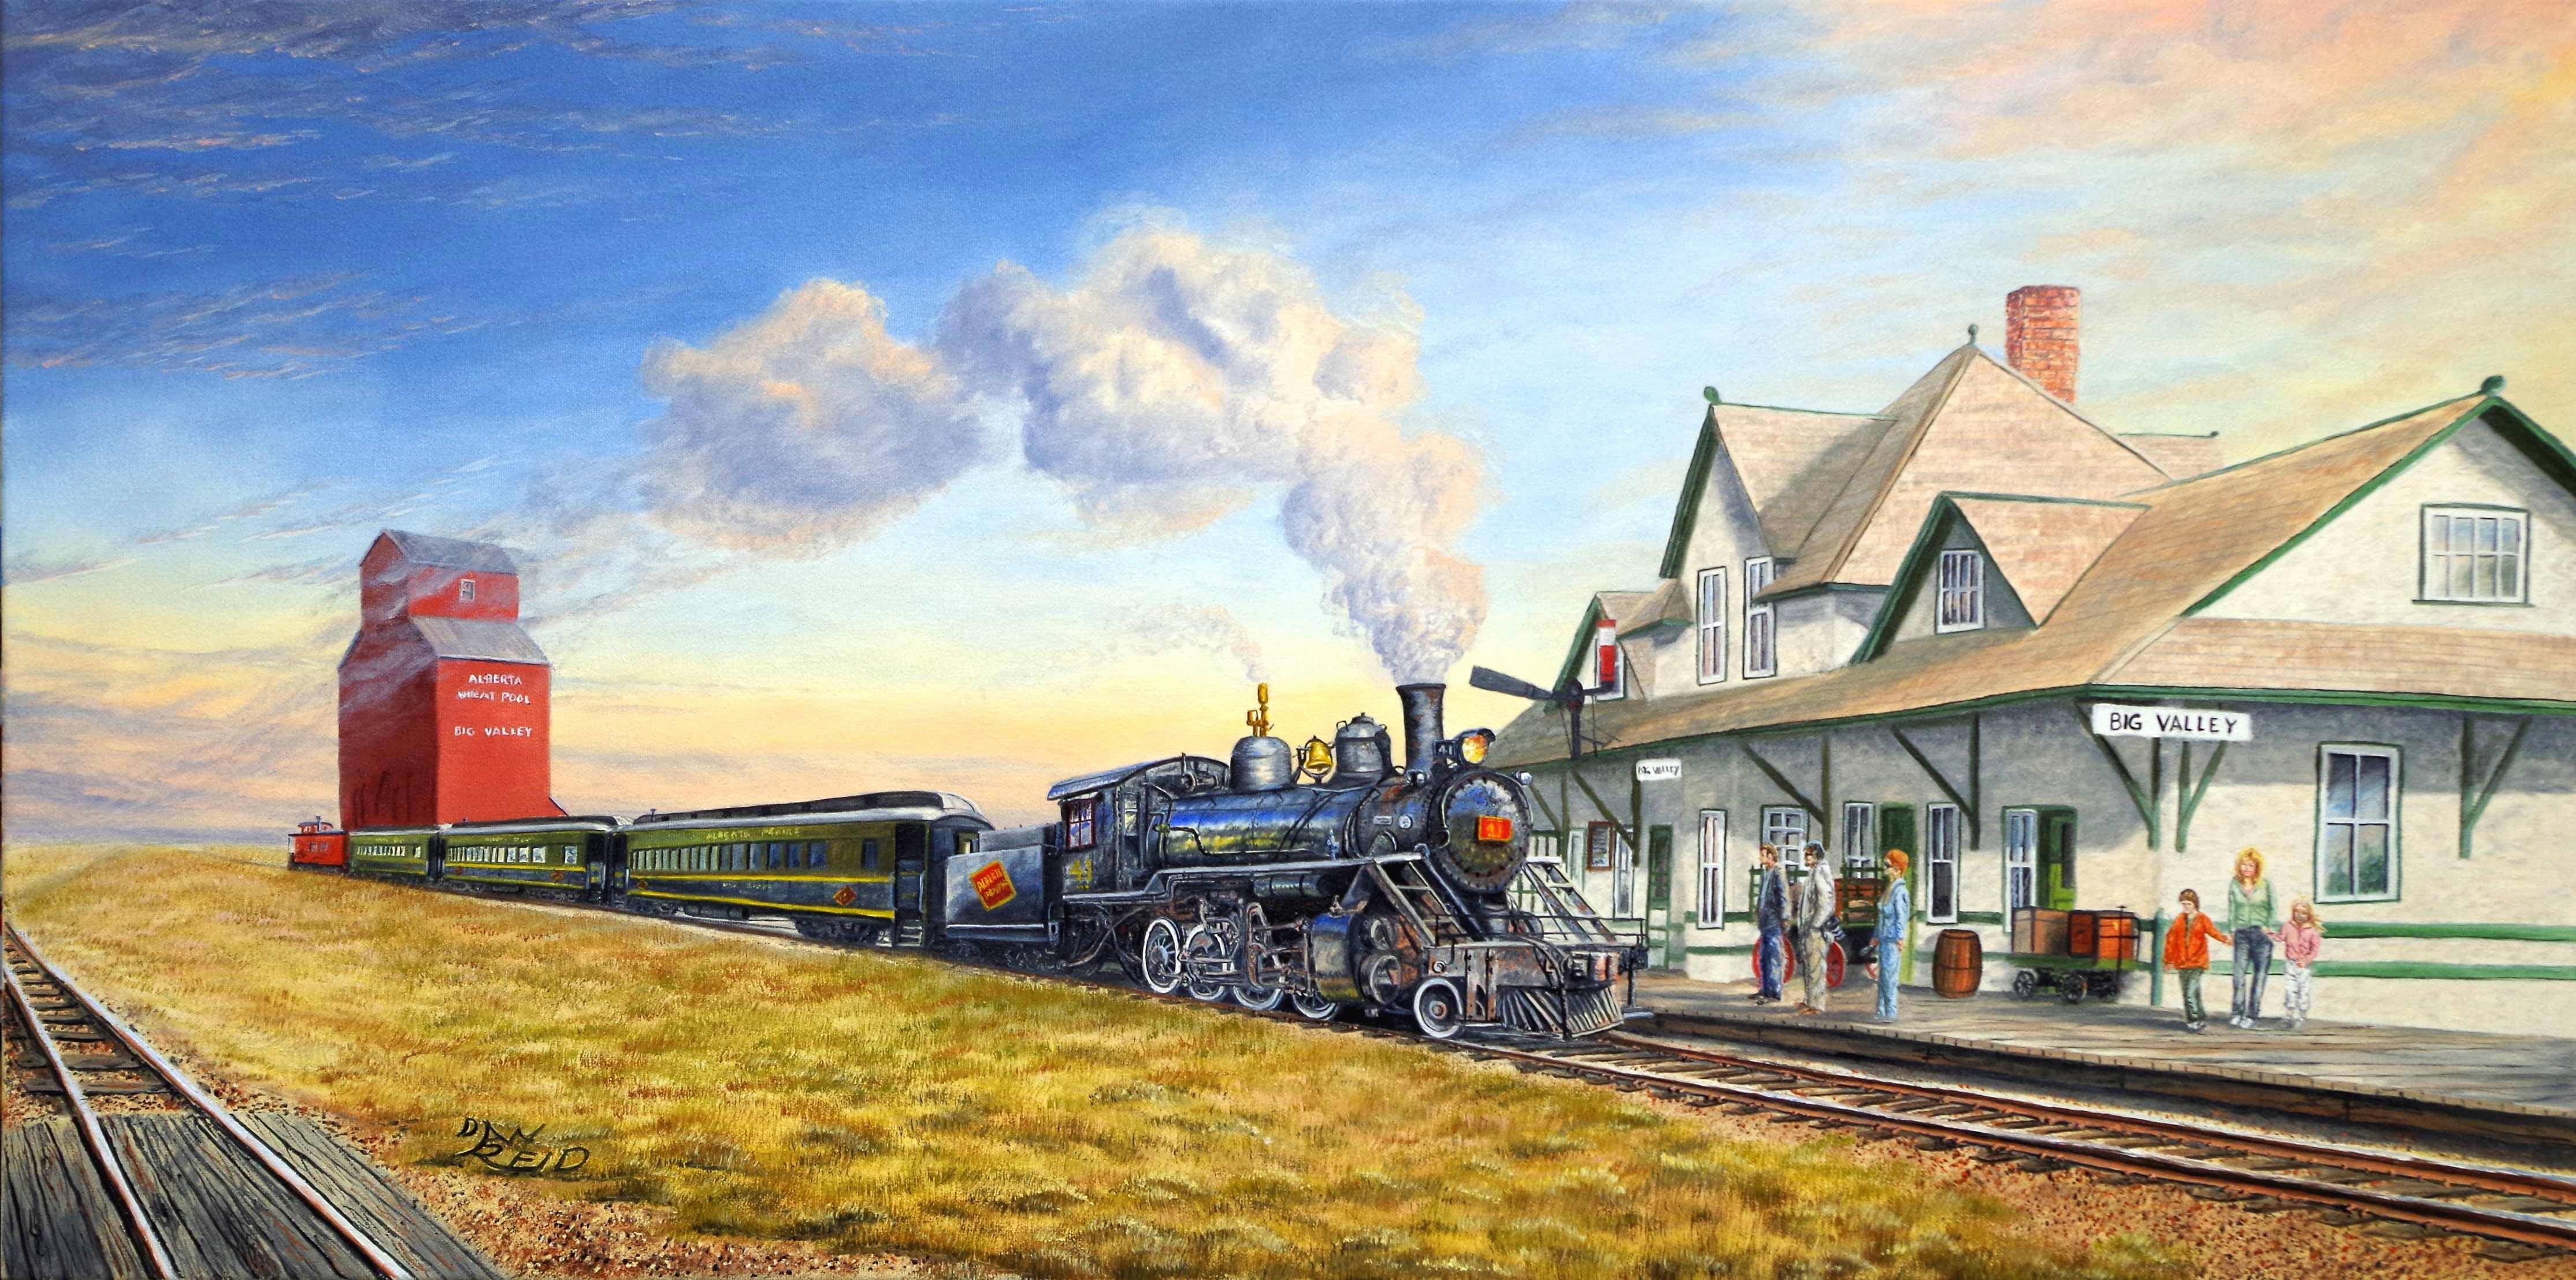 Pulling into Big Vallery Stretched Canvas Artwork by Dan Reid